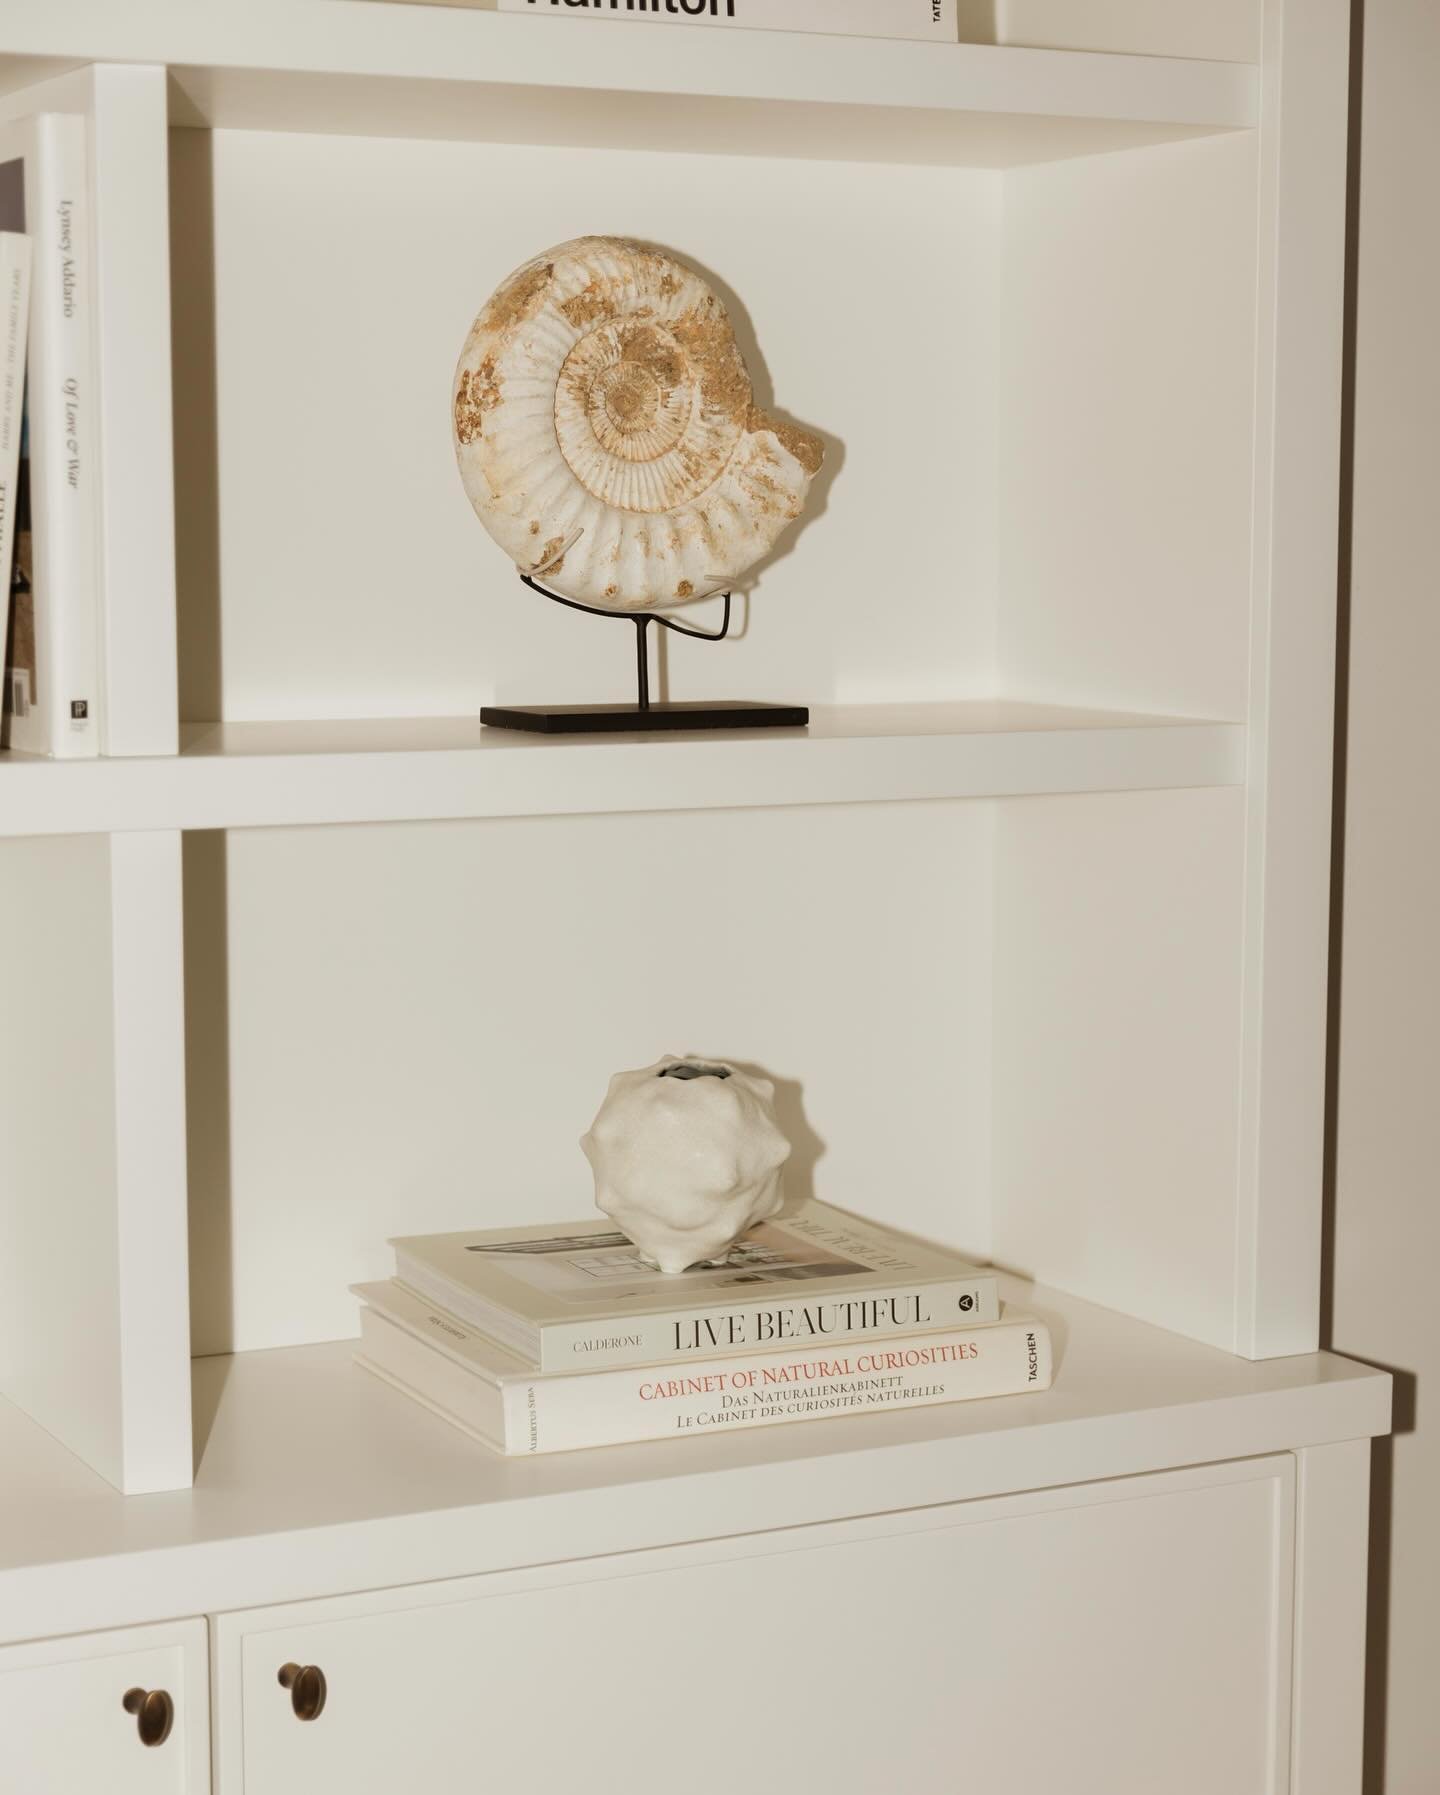 A look at a recent shelf styling we completed for an interior client in Notting Hill. When curating beautifully styled shelves, we always start with the items the client wants to keep. These become the primary focus to showcase their personality. We 